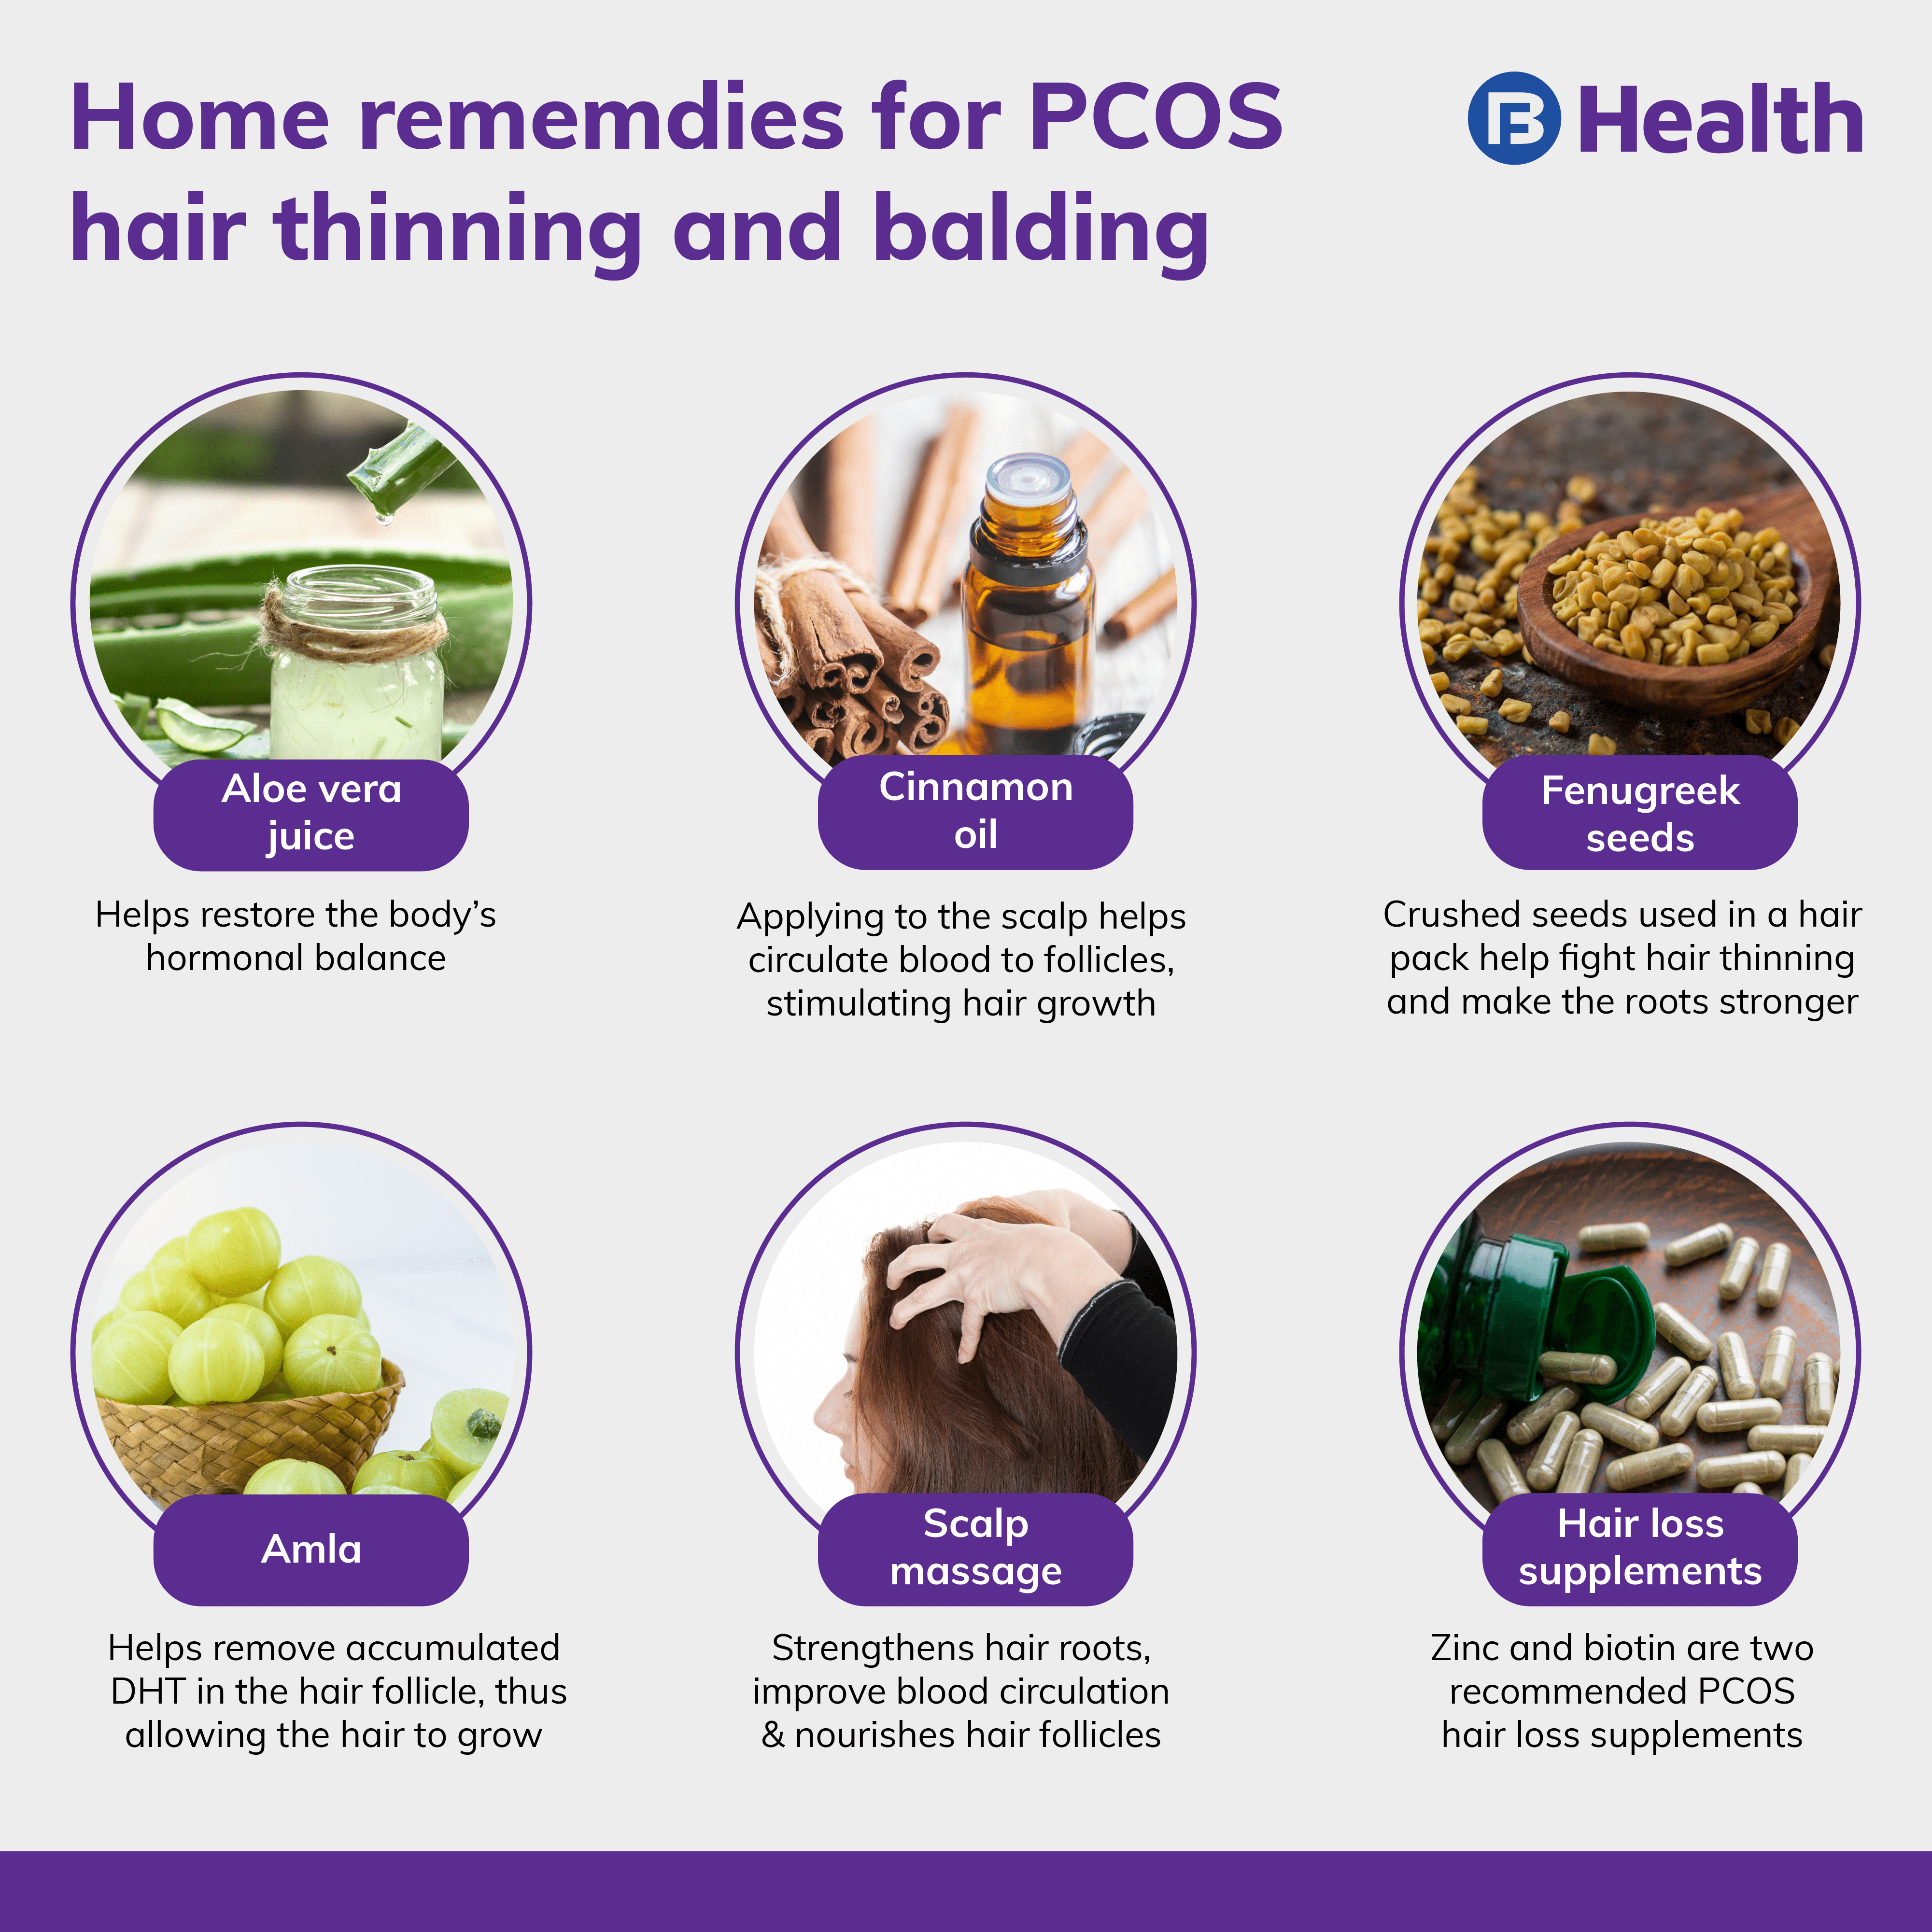 PCOS hair loss: Treatments and easy home remedies